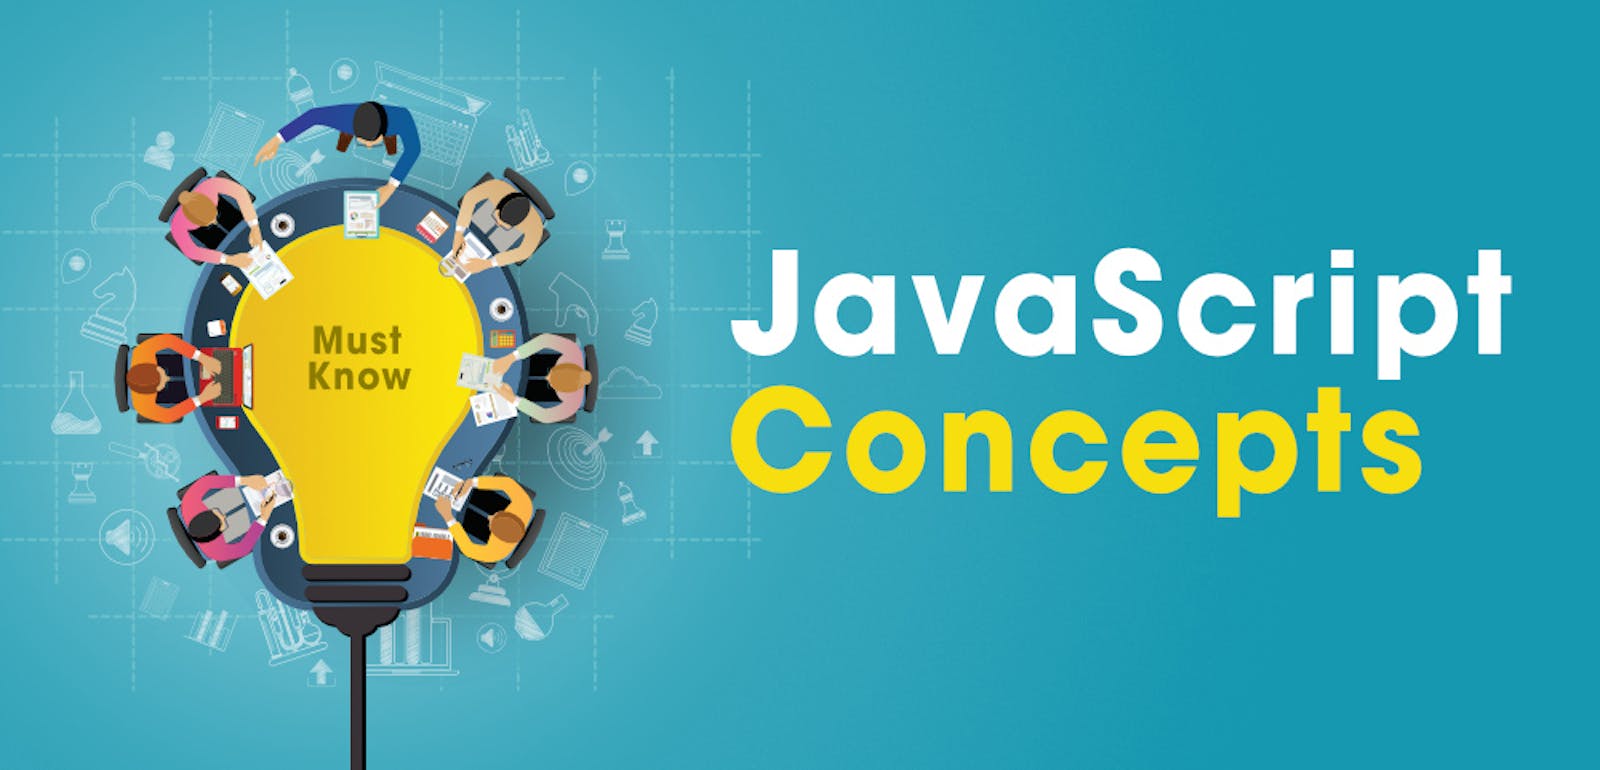 7 JavaScript Concepts That Every Web Developer Should Know